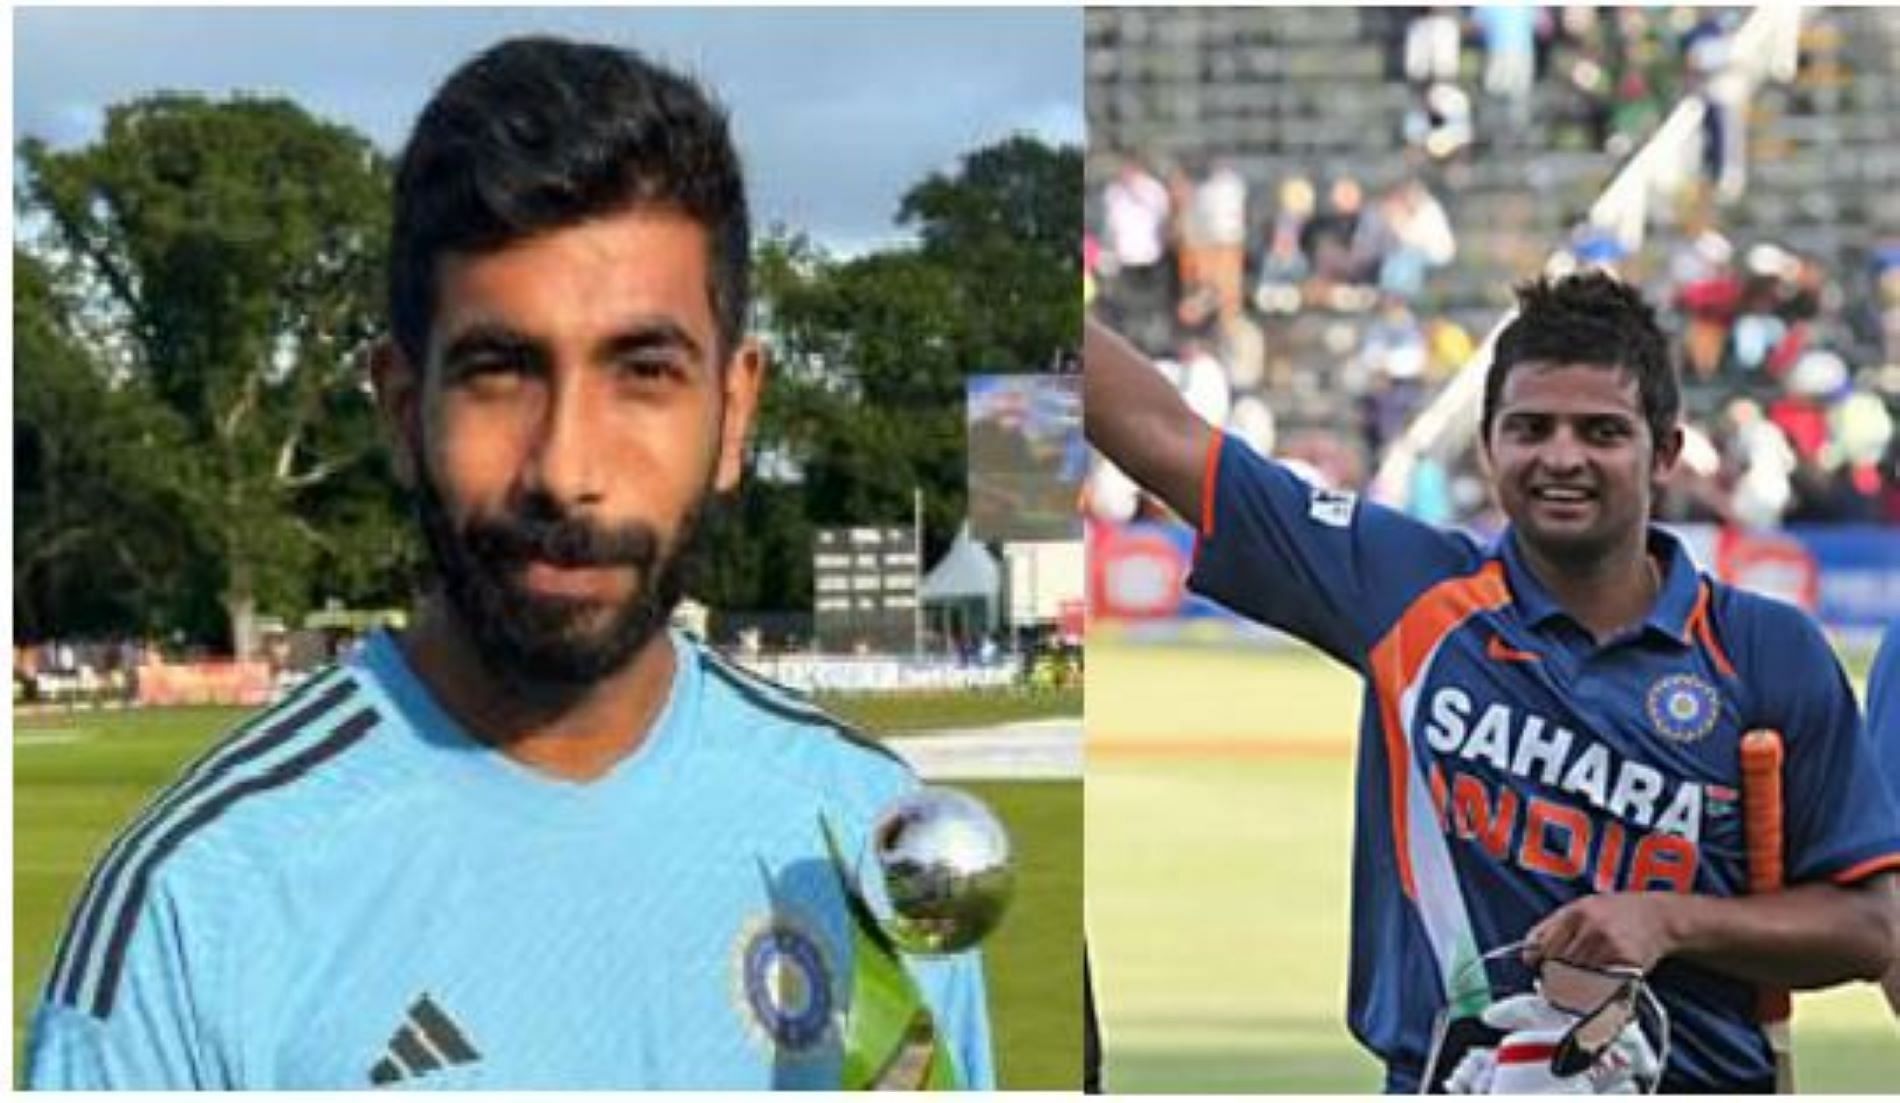 India have had a numbers of captains starring in a T20 series for over a decade